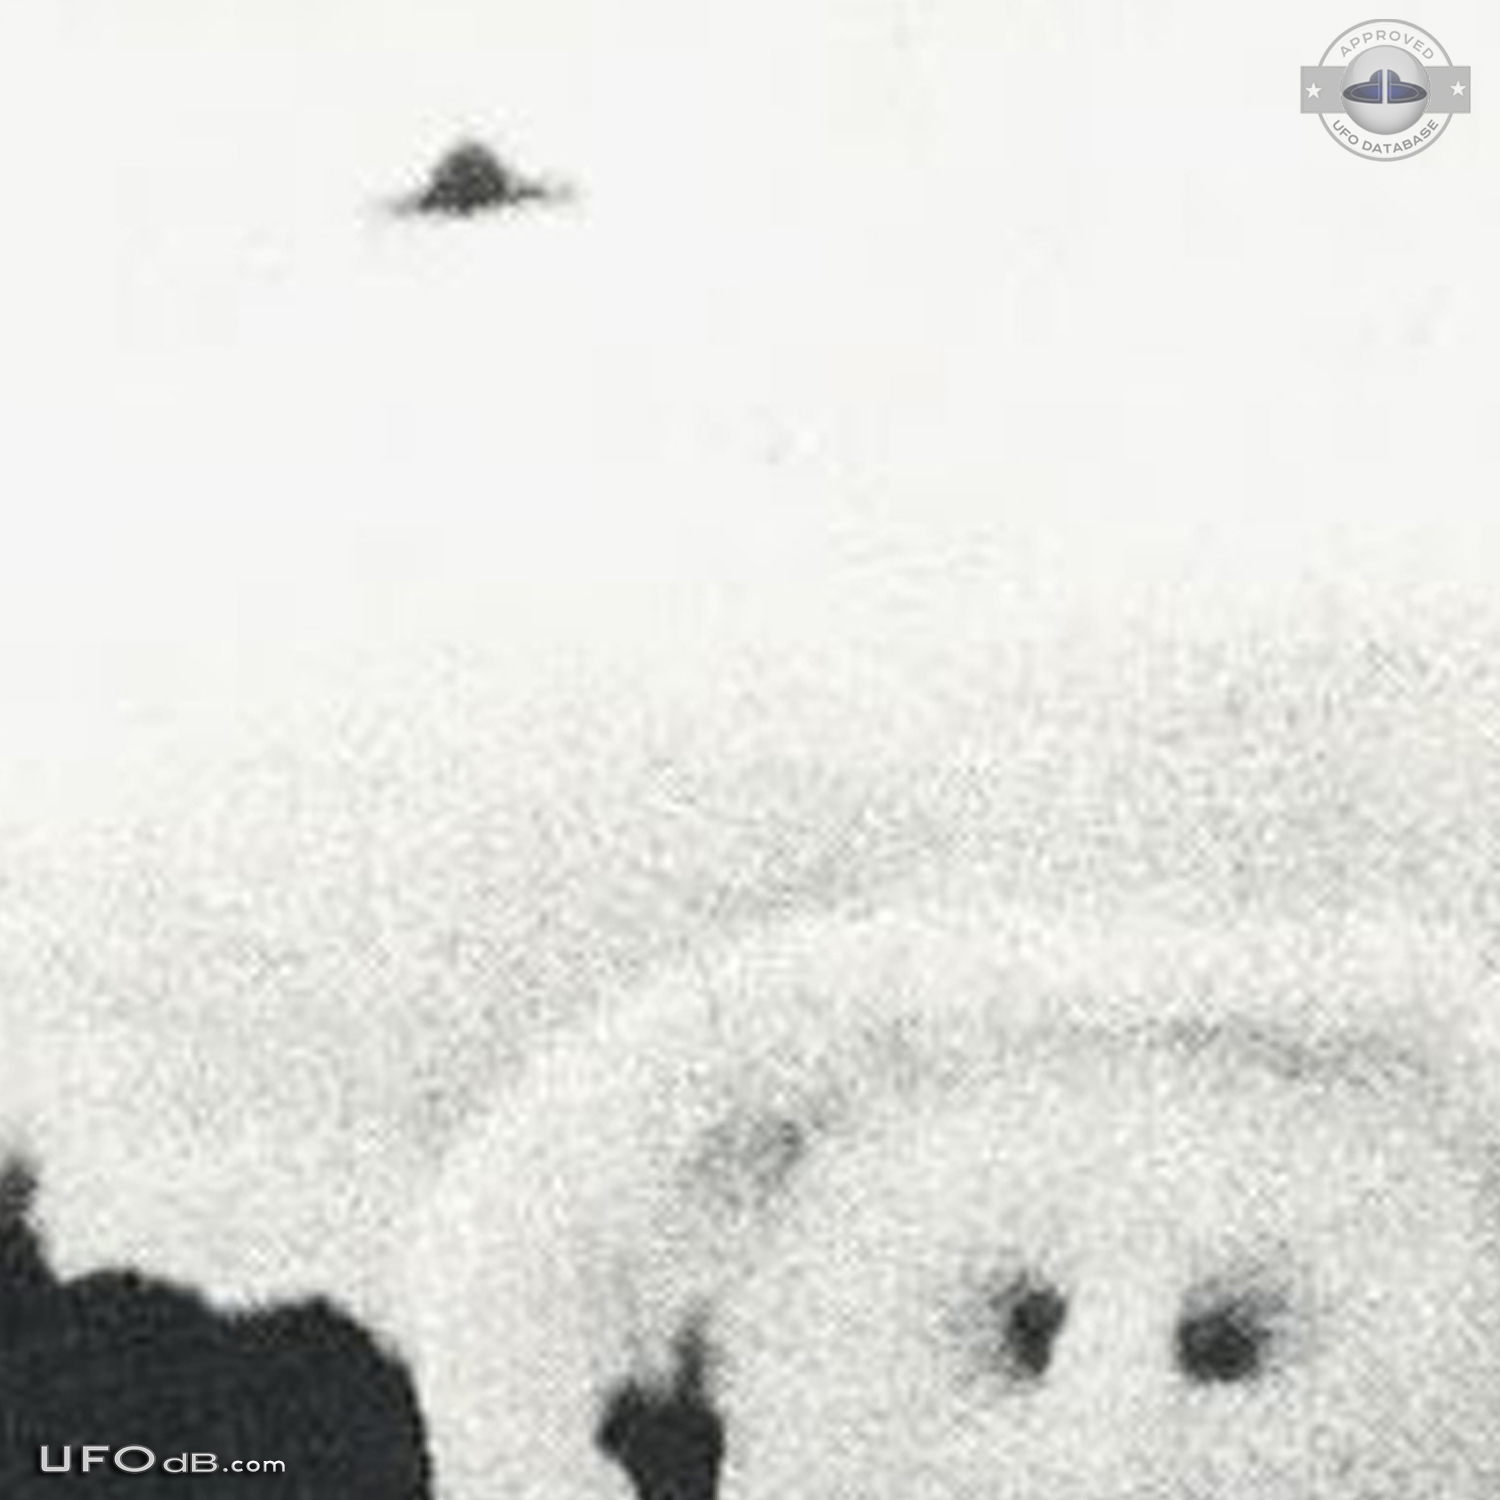 Picture of snowman in Nanaimo BC Canada gets a passing saucer UFO 1975 UFO Picture #498-3